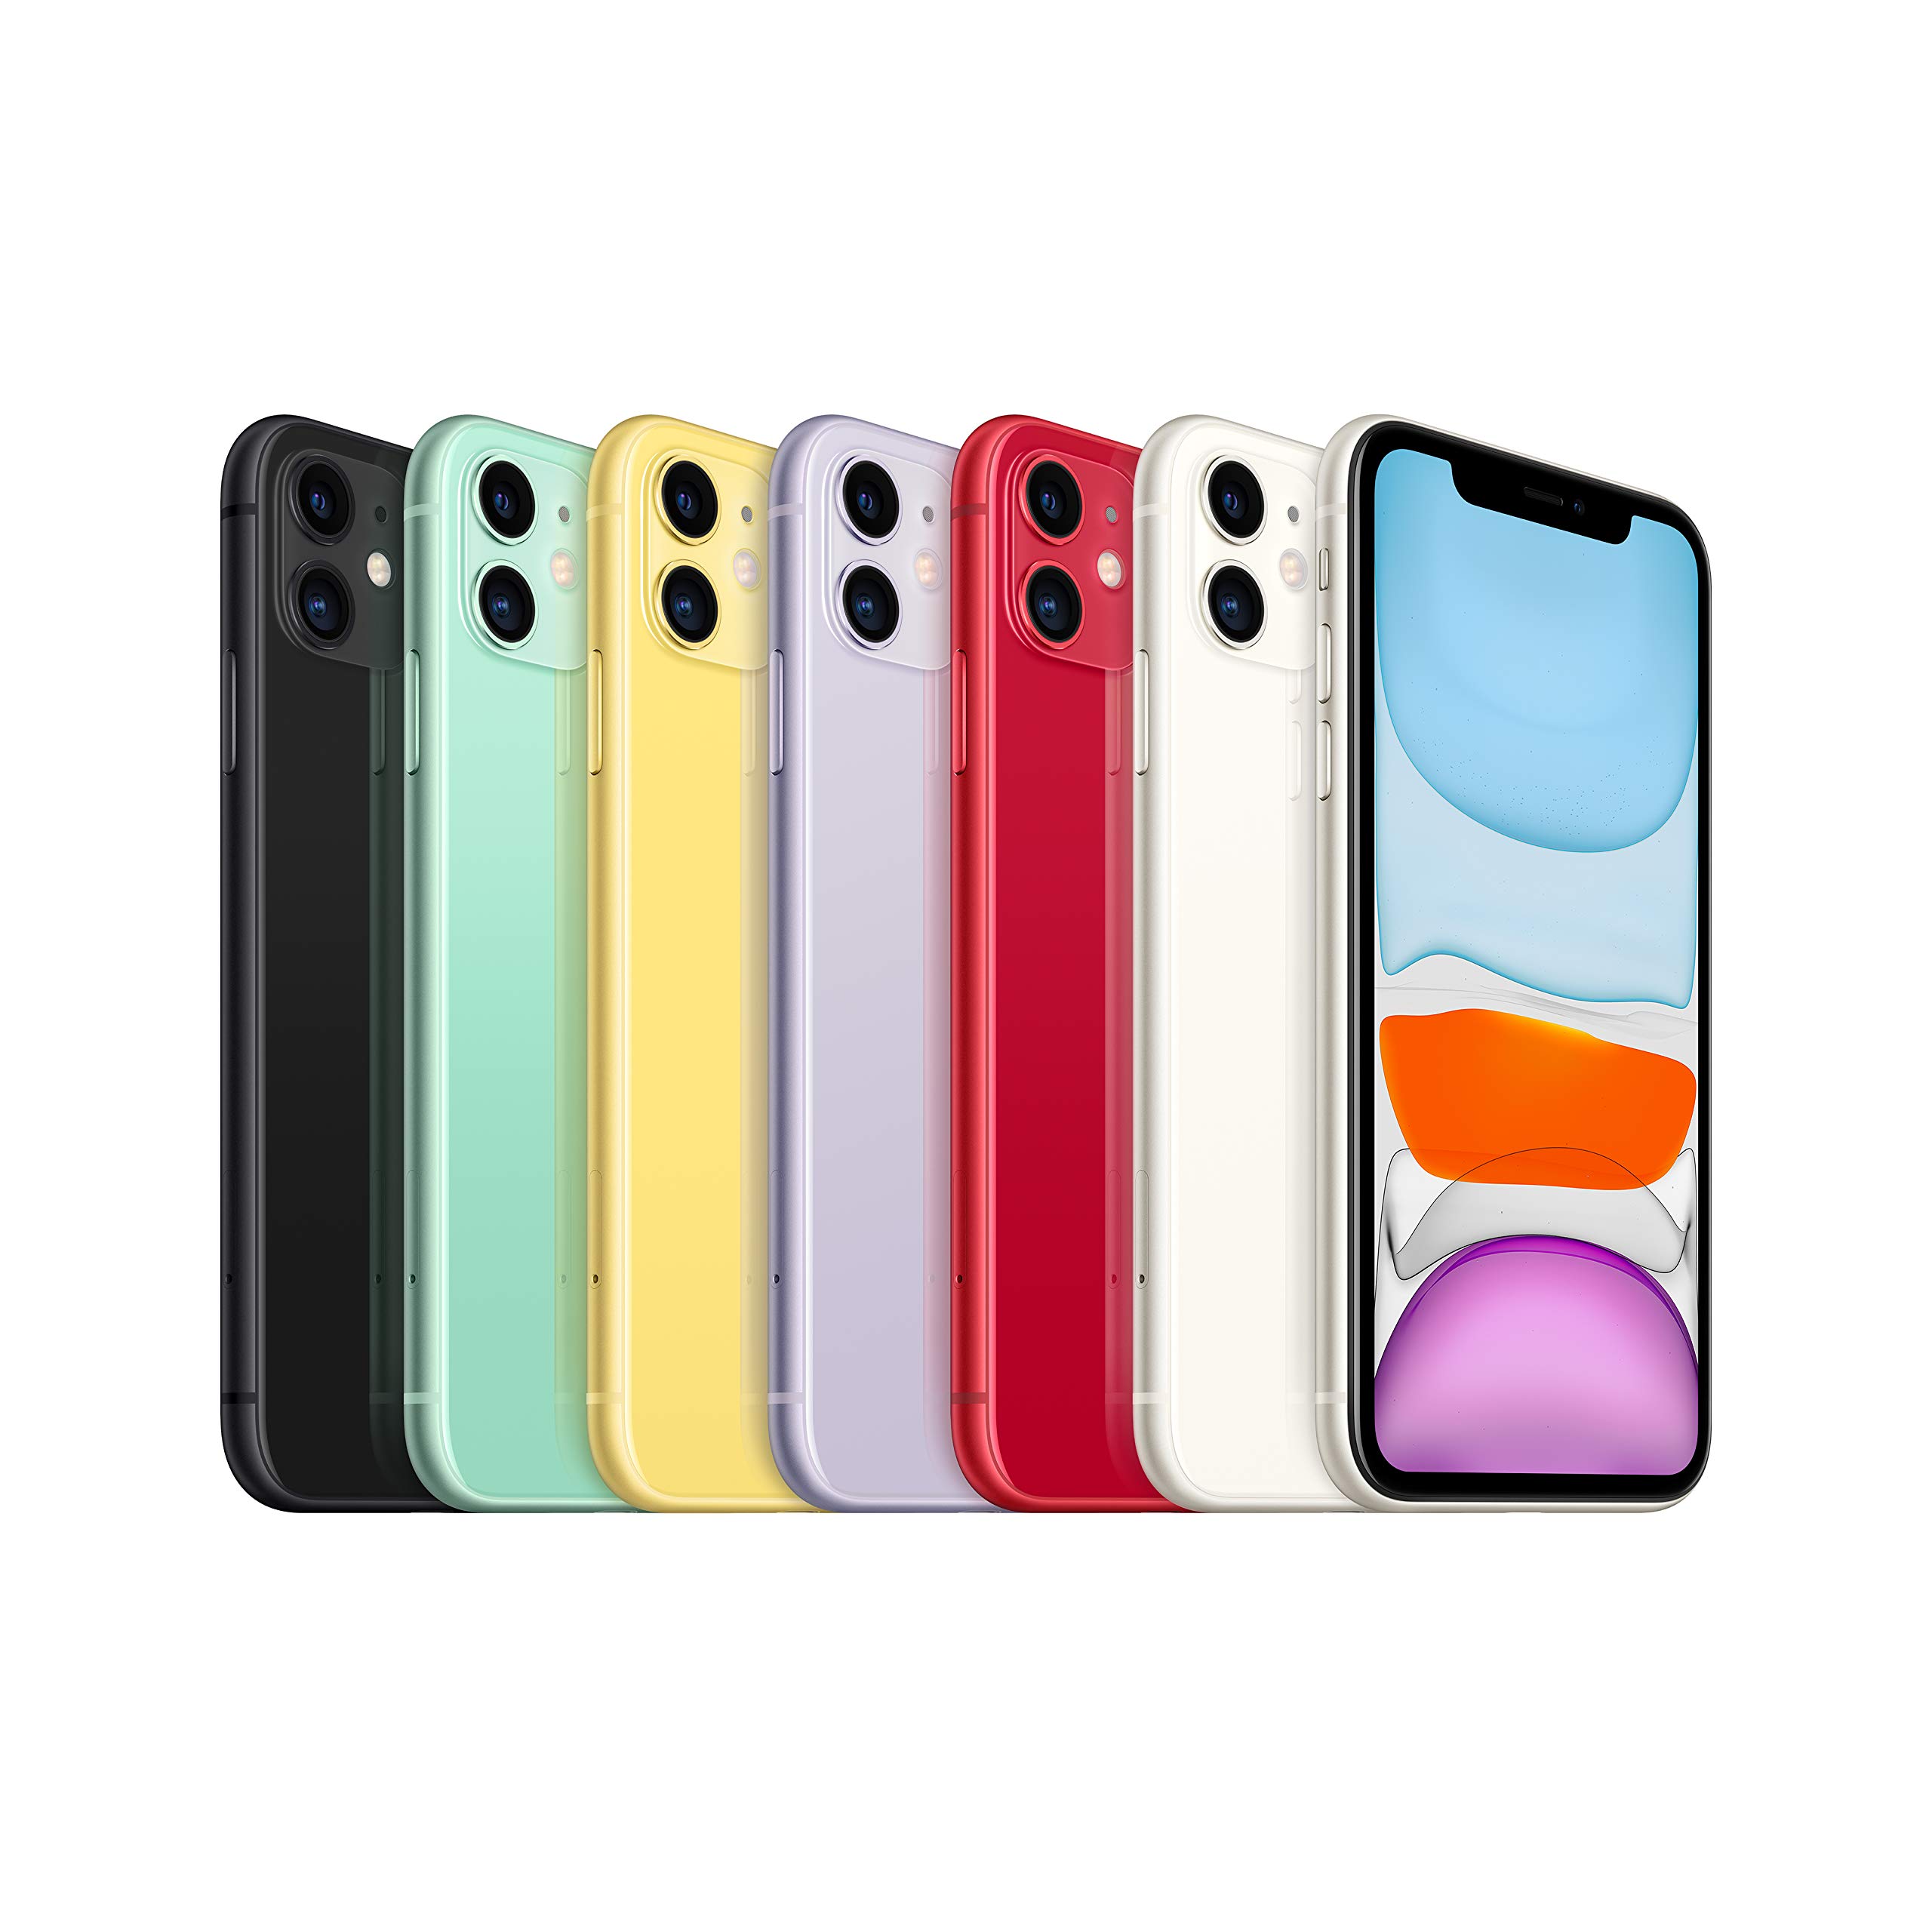 Apple iPhone 11 [64GB, Yellow] + Carrier Subscription [Cricket Wireless]